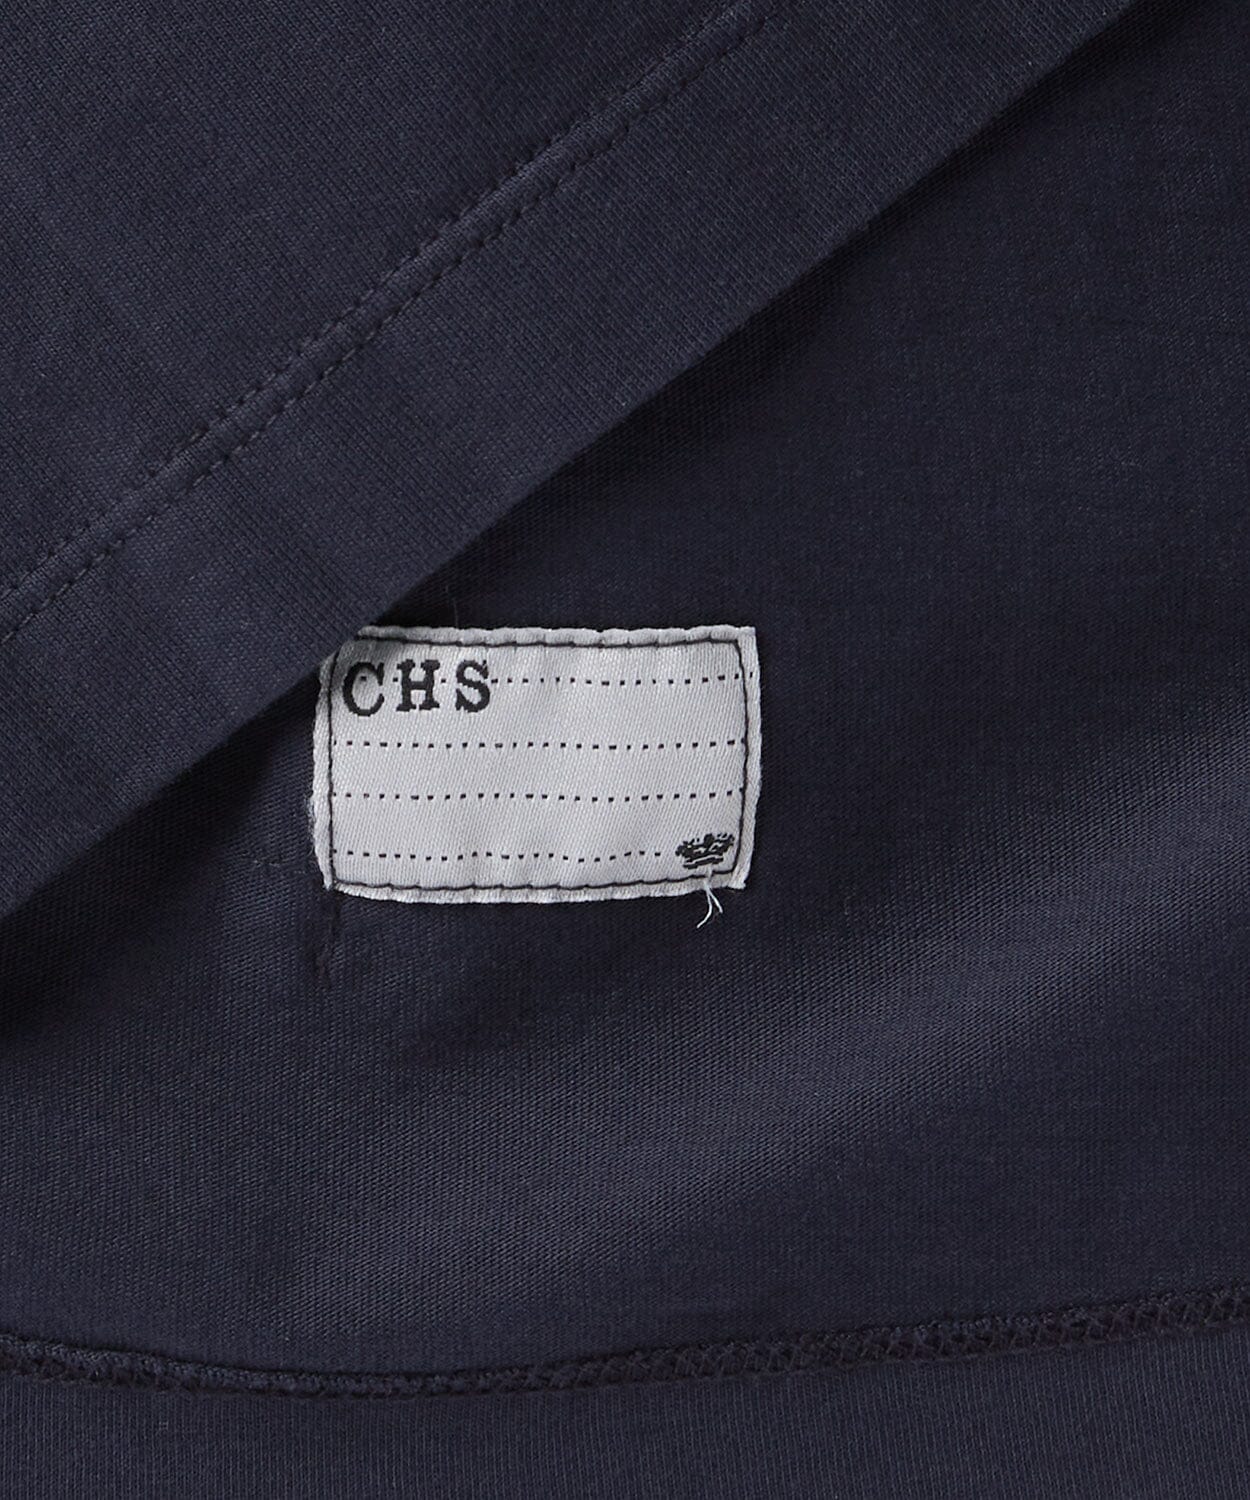 detail of a mens tee